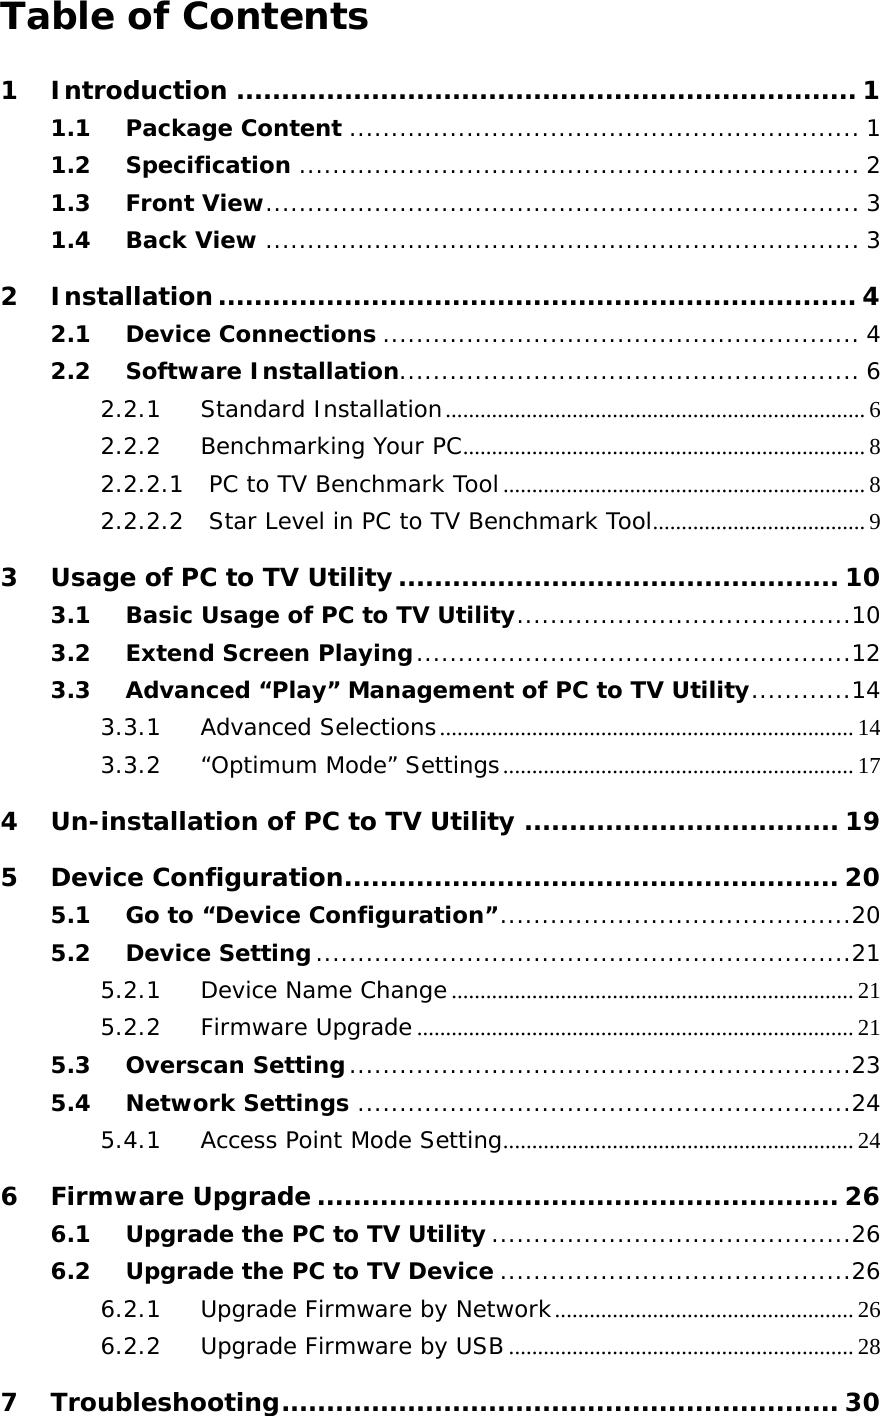   Table of Contents 1 Introduction ..................................................................... 1 1.1 Package Content ............................................................. 1 1.2 Specification ................................................................... 2 1.3 Front View ....................................................................... 3 1.4 Back View ....................................................................... 3 2 Installation ....................................................................... 4 2.1 Device Connections ......................................................... 4 2.2 Software Installation....................................................... 6 2.2.1 Standard Installation ......................................................................... 6 2.2.2 Benchmarking Your PC ...................................................................... 8 2.2.2.1 PC to TV Benchmark Tool ............................................................... 8 2.2.2.2 Star Level in PC to TV Benchmark Tool .....................................  9 3 Usage of PC to TV Utility ................................................. 10 3.1 Basic Usage of PC to TV Utility ........................................ 10 3.2 Extend Screen Playing .................................................... 12 3.3 Advanced “Play” Management of PC to TV Utility ............ 14 3.3.1 Advanced Selections ........................................................................ 14 3.3.2 “Optimum Mode” Settings ............................................................. 17 4 Un-installation of PC to TV Utility ................................... 19 5 Device Configuration....................................................... 20 5.1 Go to “Device Configuration” .......................................... 20 5.2 Device Setting ................................................................ 21 5.2.1 Device Name Change ...................................................................... 21 5.2.2 Firmware Upgrade ............................................................................ 21 5.3 Overscan Setting ............................................................ 23 5.4 Network Settings ........................................................... 24 5.4.1 Access Point Mode Setting ............................................................. 24 6 Firmware Upgrade .......................................................... 26 6.1 Upgrade the PC to TV Utility ........................................... 26 6.2 Upgrade the PC to TV Device .......................................... 26 6.2.1 Upgrade Firmware by Network .................................................... 26 6.2.2 Upgrade Firmware by USB ............................................................ 28 7 Troubleshooting .............................................................. 30 